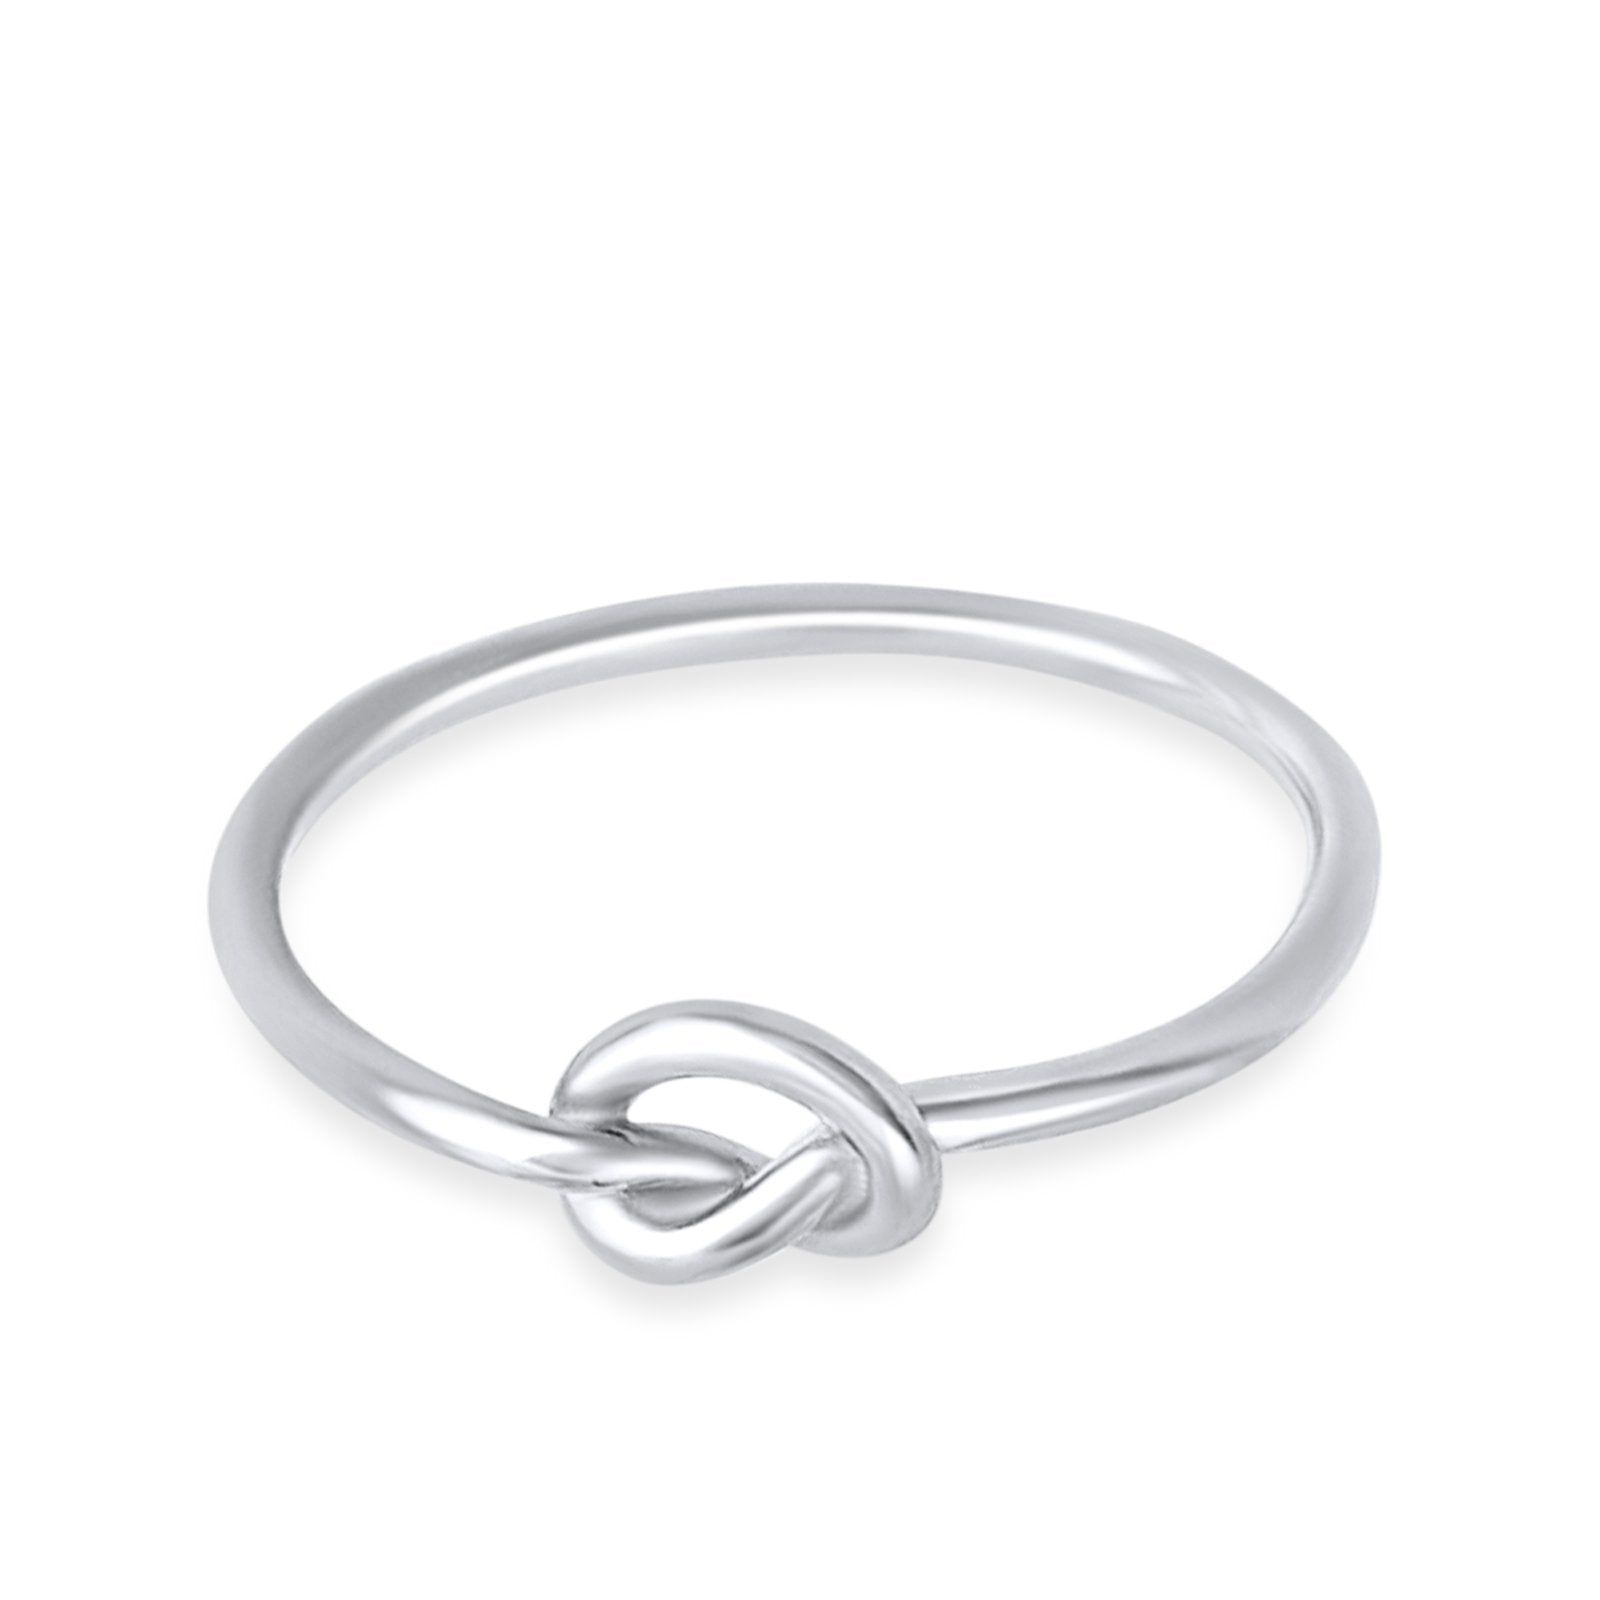 Tangled Love Knot Heart Ring Band Promise Plain Ring 925 Sterling Silver